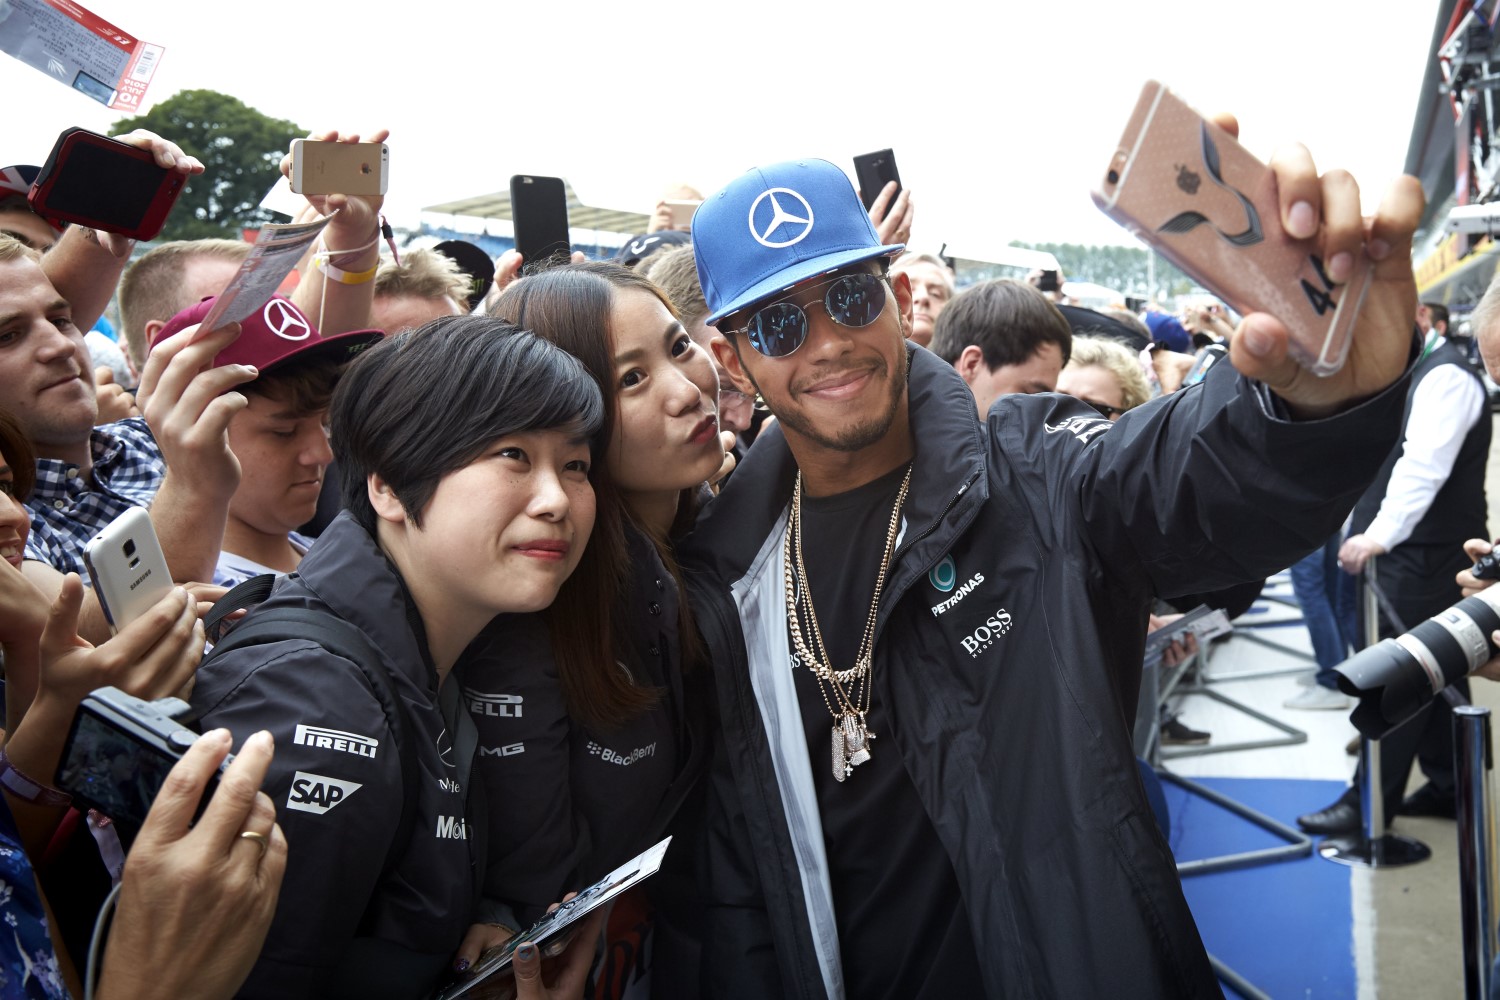 Hamilton with his fans at Silverstone